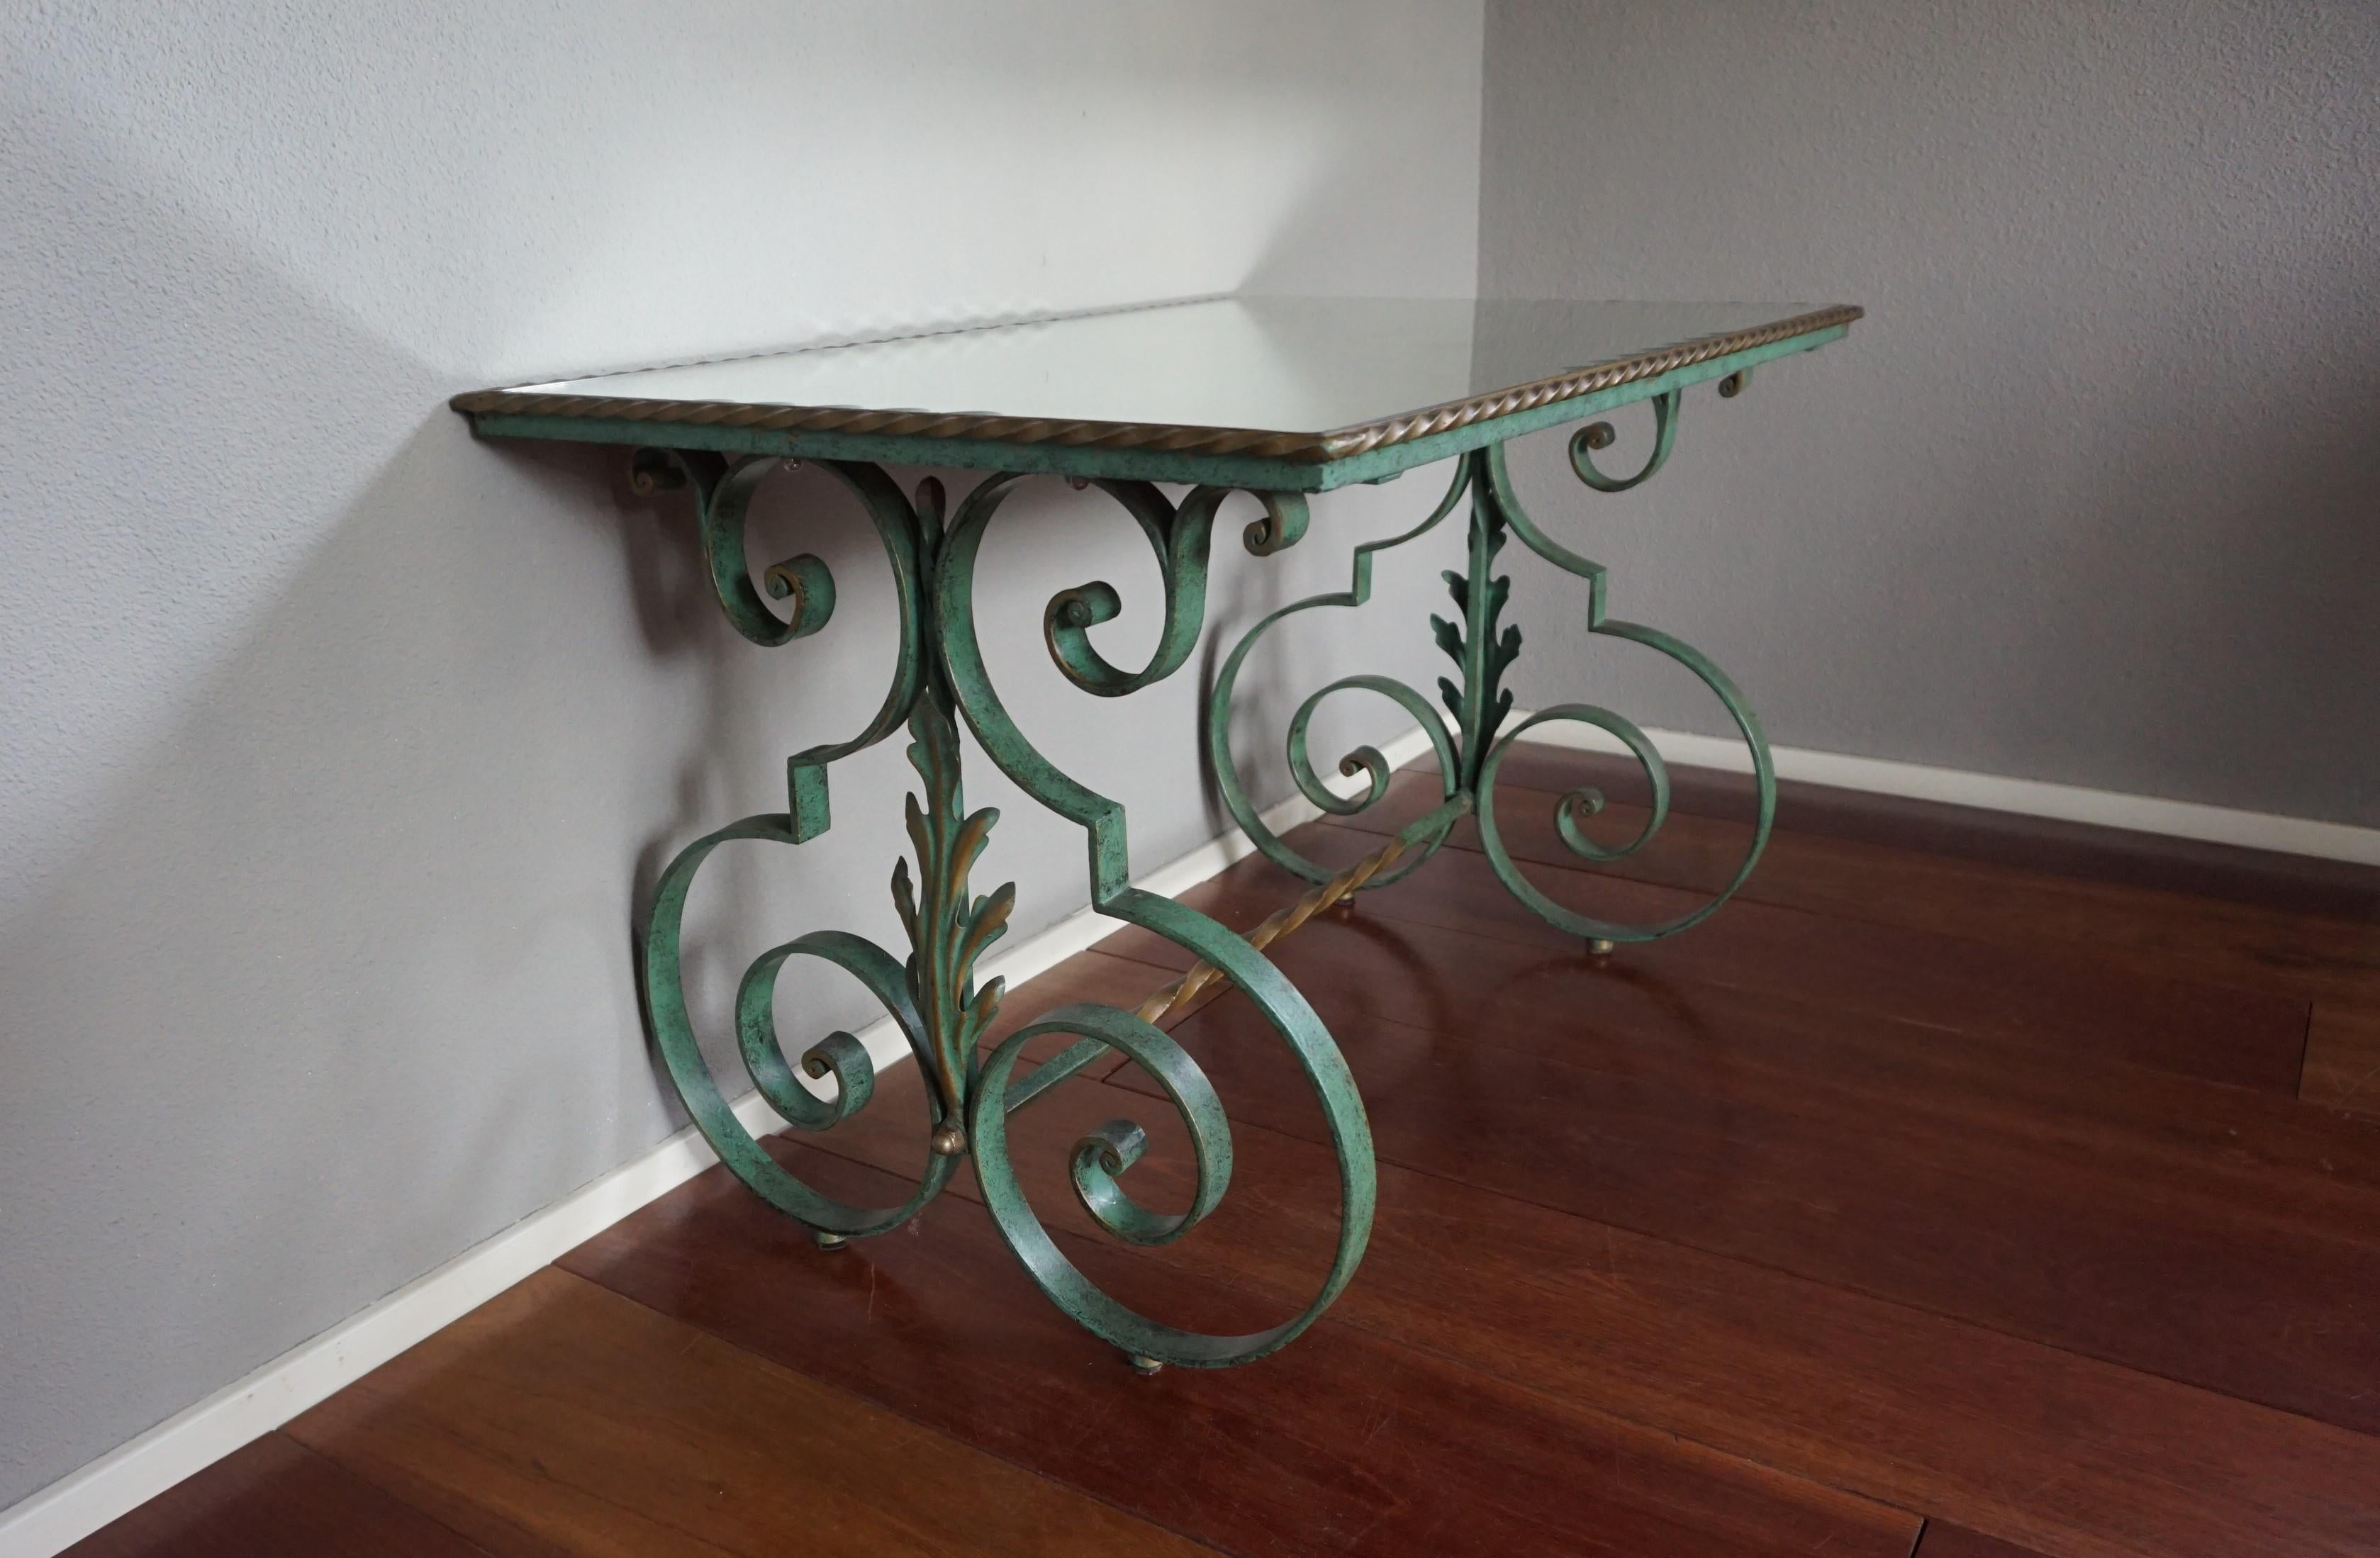 Handcrafted wrought iron table with a bronze patina and beveled mirror top.

If you are looking for an elegant table to grace your living space or office then this hand-crafted specimen from mid 20th century France could be perfect for you. Apart